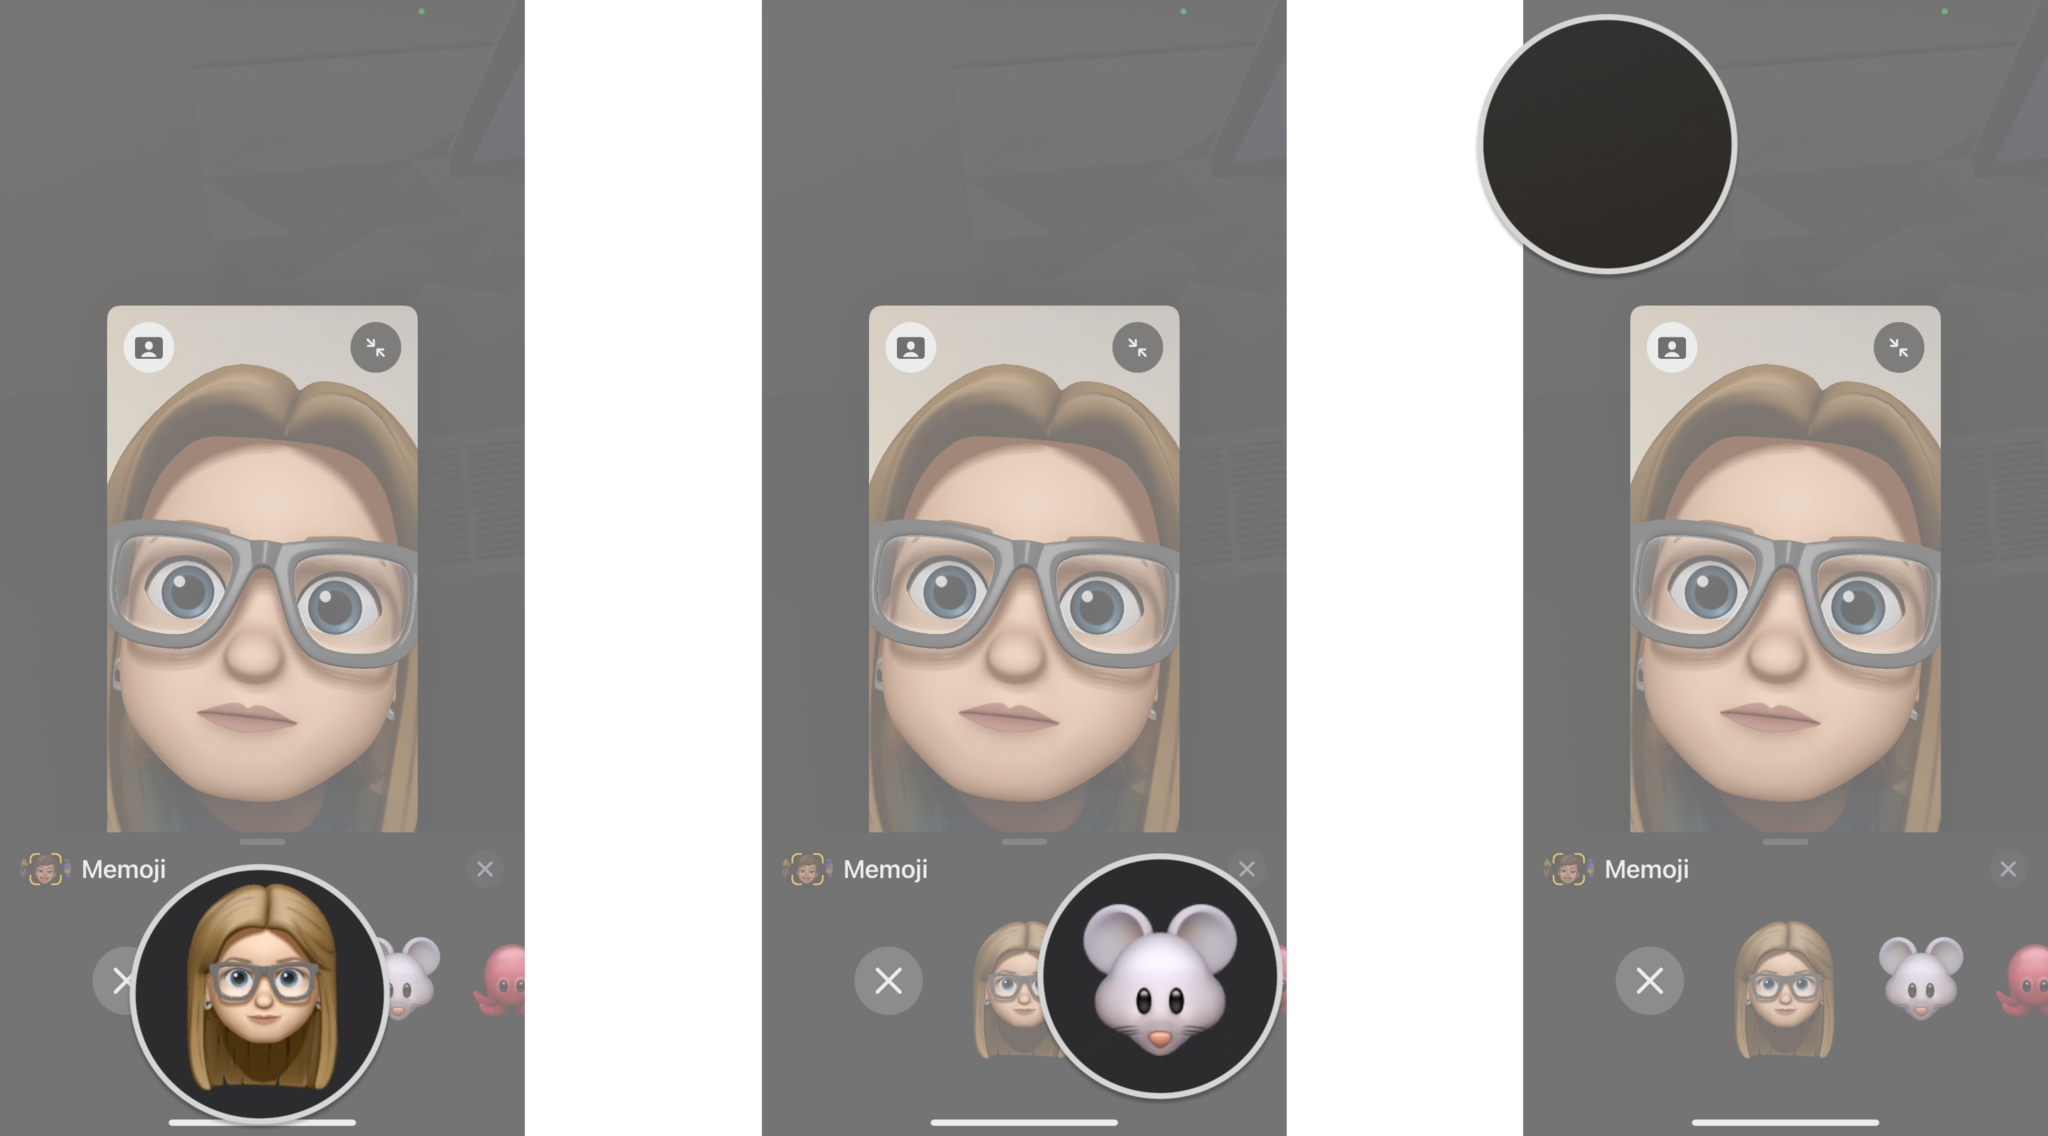 How to use FaceTime Memoji and Animoji on the iPhone by showing steps: Tap an Animoji or Memoji, Tap outside of your live view to go back to your FaceTime call